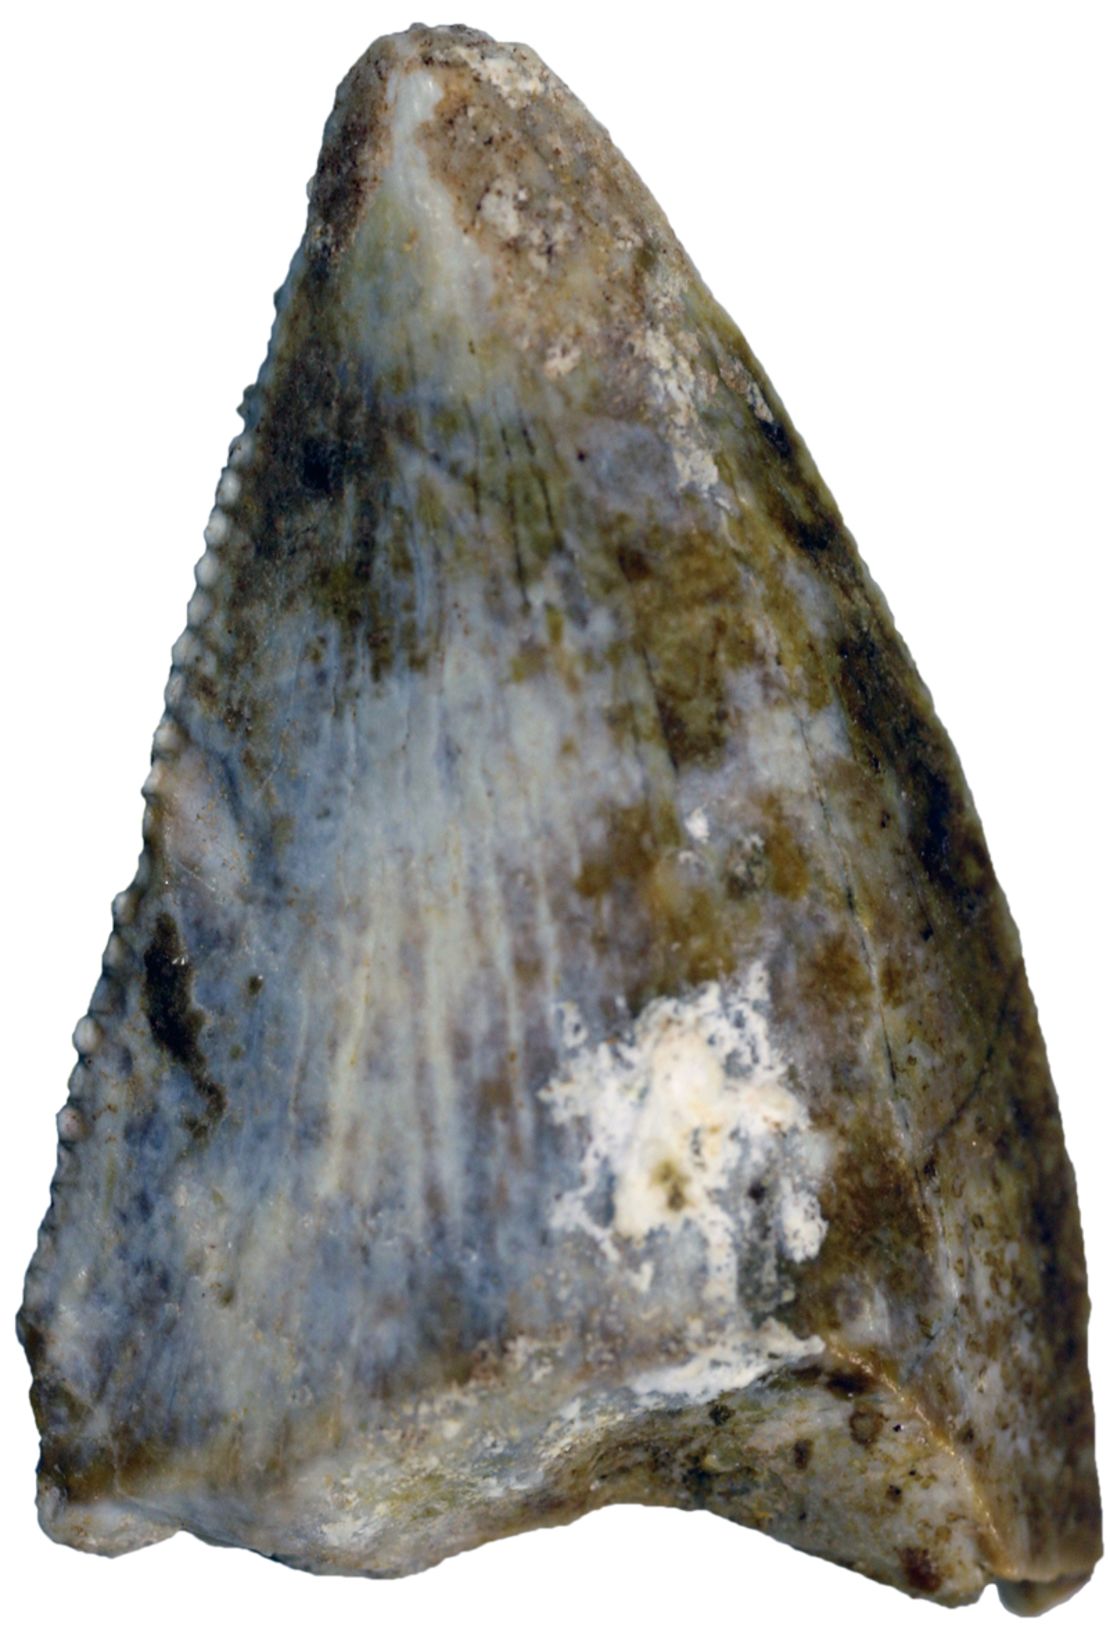 This fossilized tooth belonged to an abelisaur -- a carnivorous, bipedal animal that stood 20 feet tall